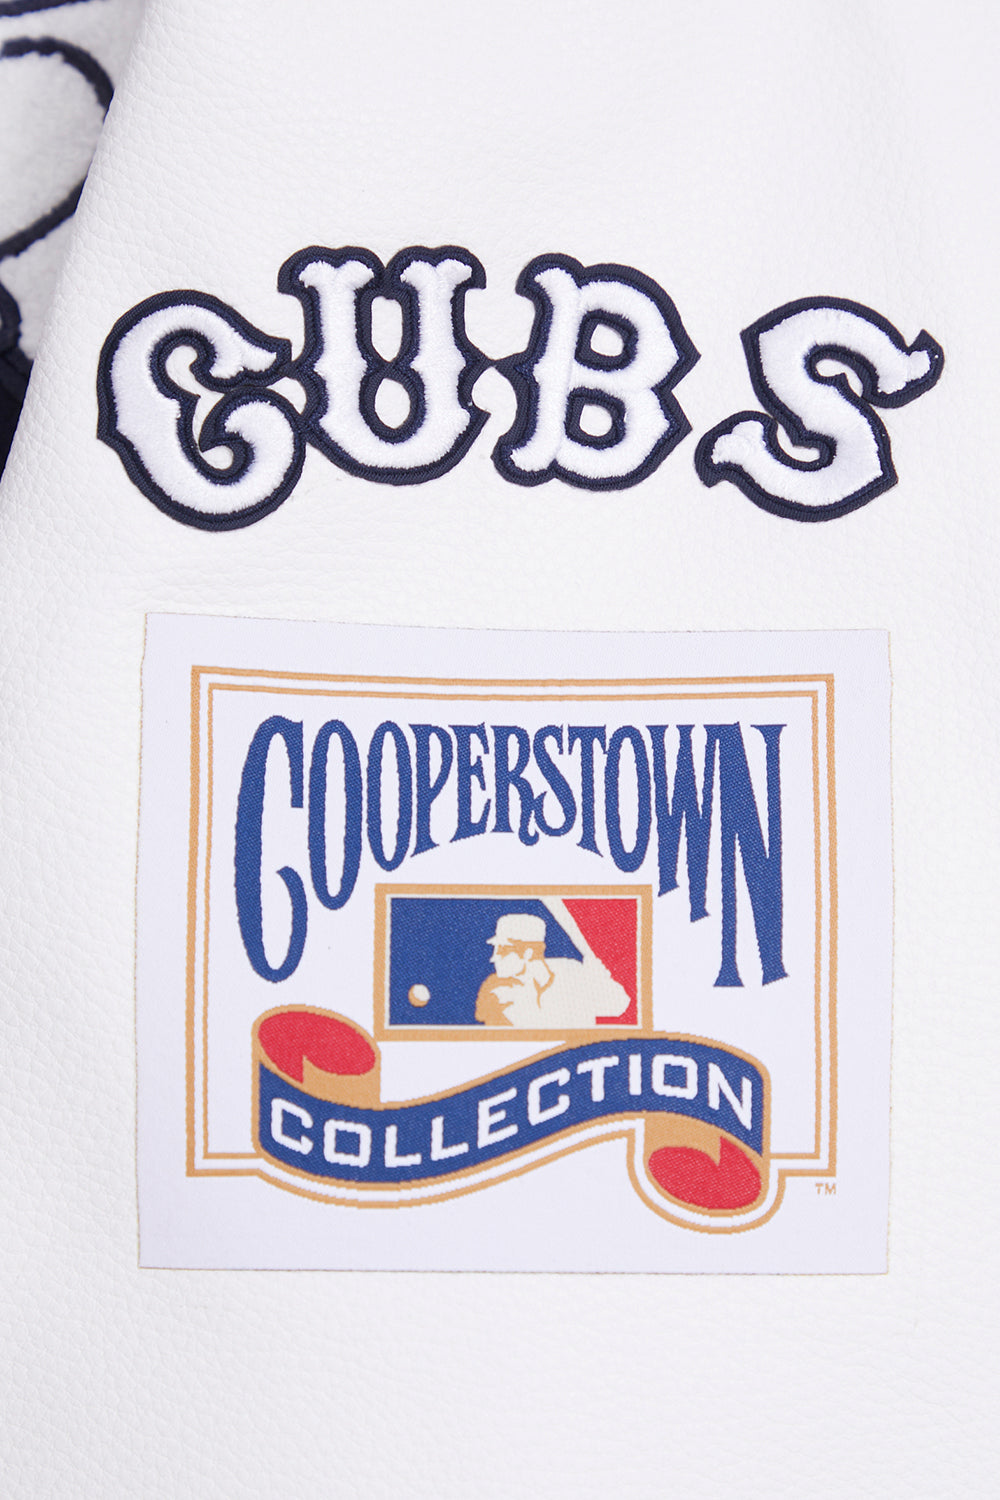 CHICAGO CUBS HOME TOWN WOOL VARSITY JACKET (ROYAL BLUE/WHITE) – Pro Standard